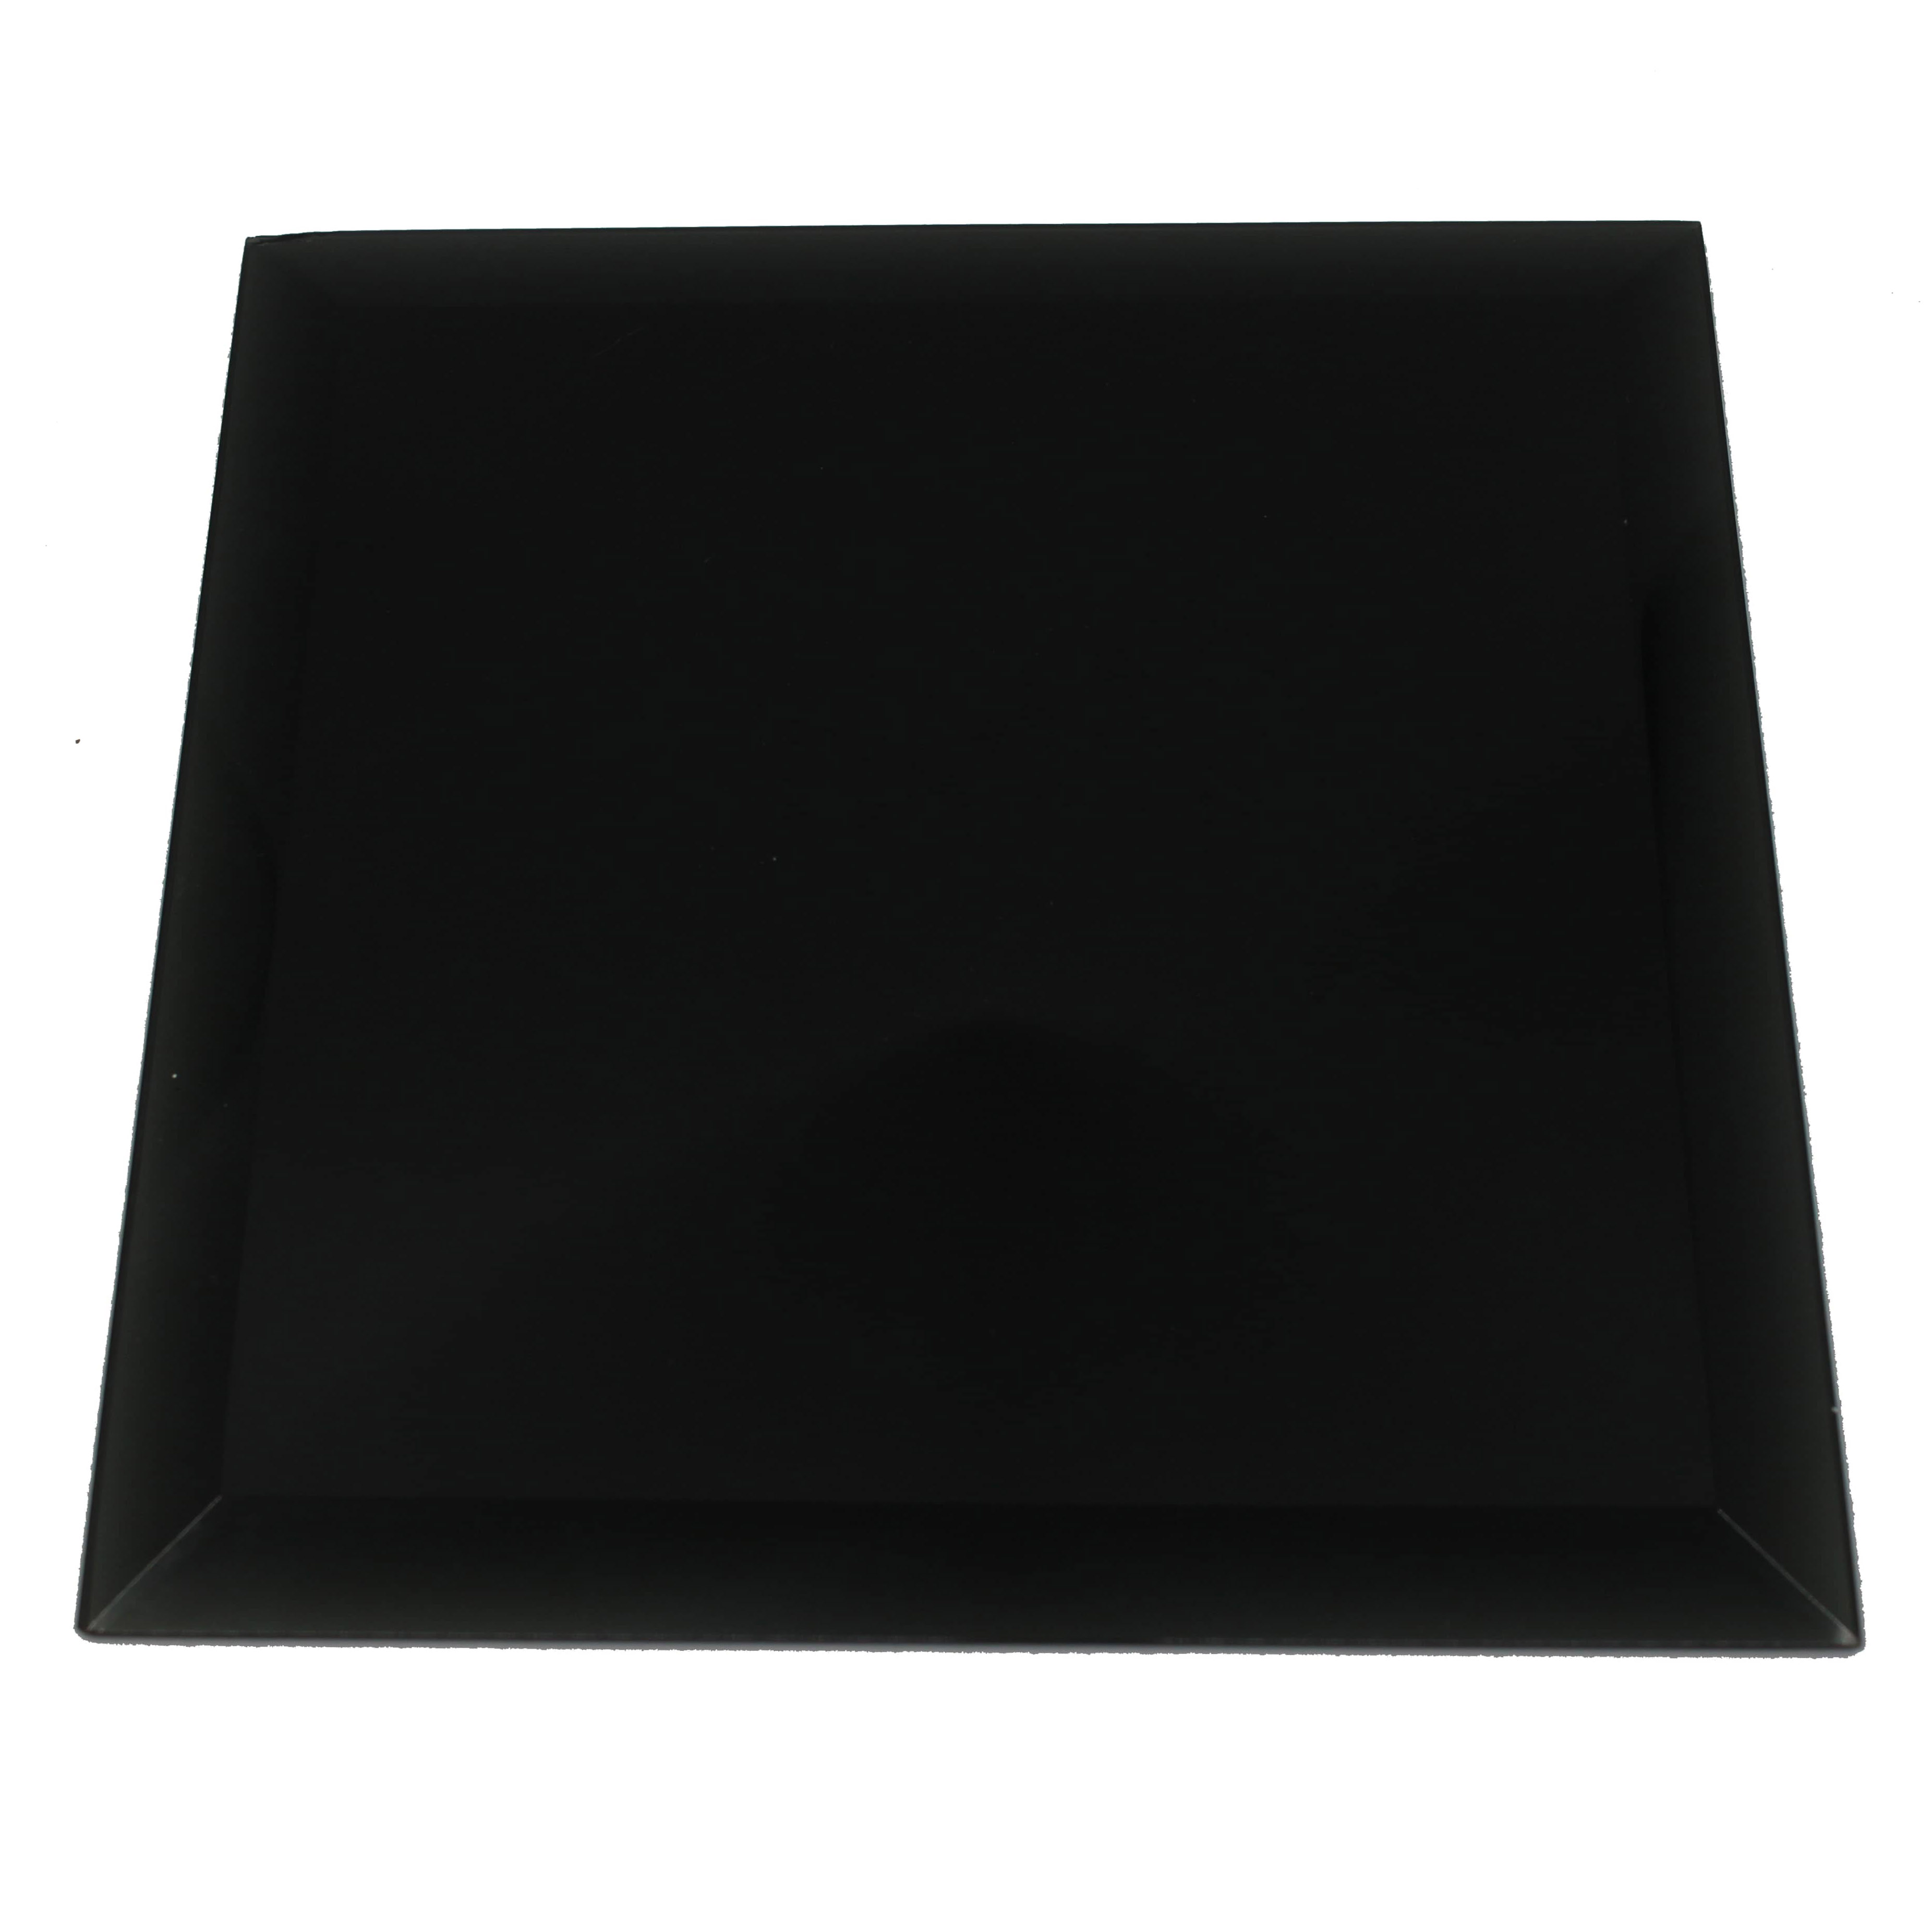 Buy 5mm super black Online | Manufacturing Glass and Mirrors | Qetaat.com